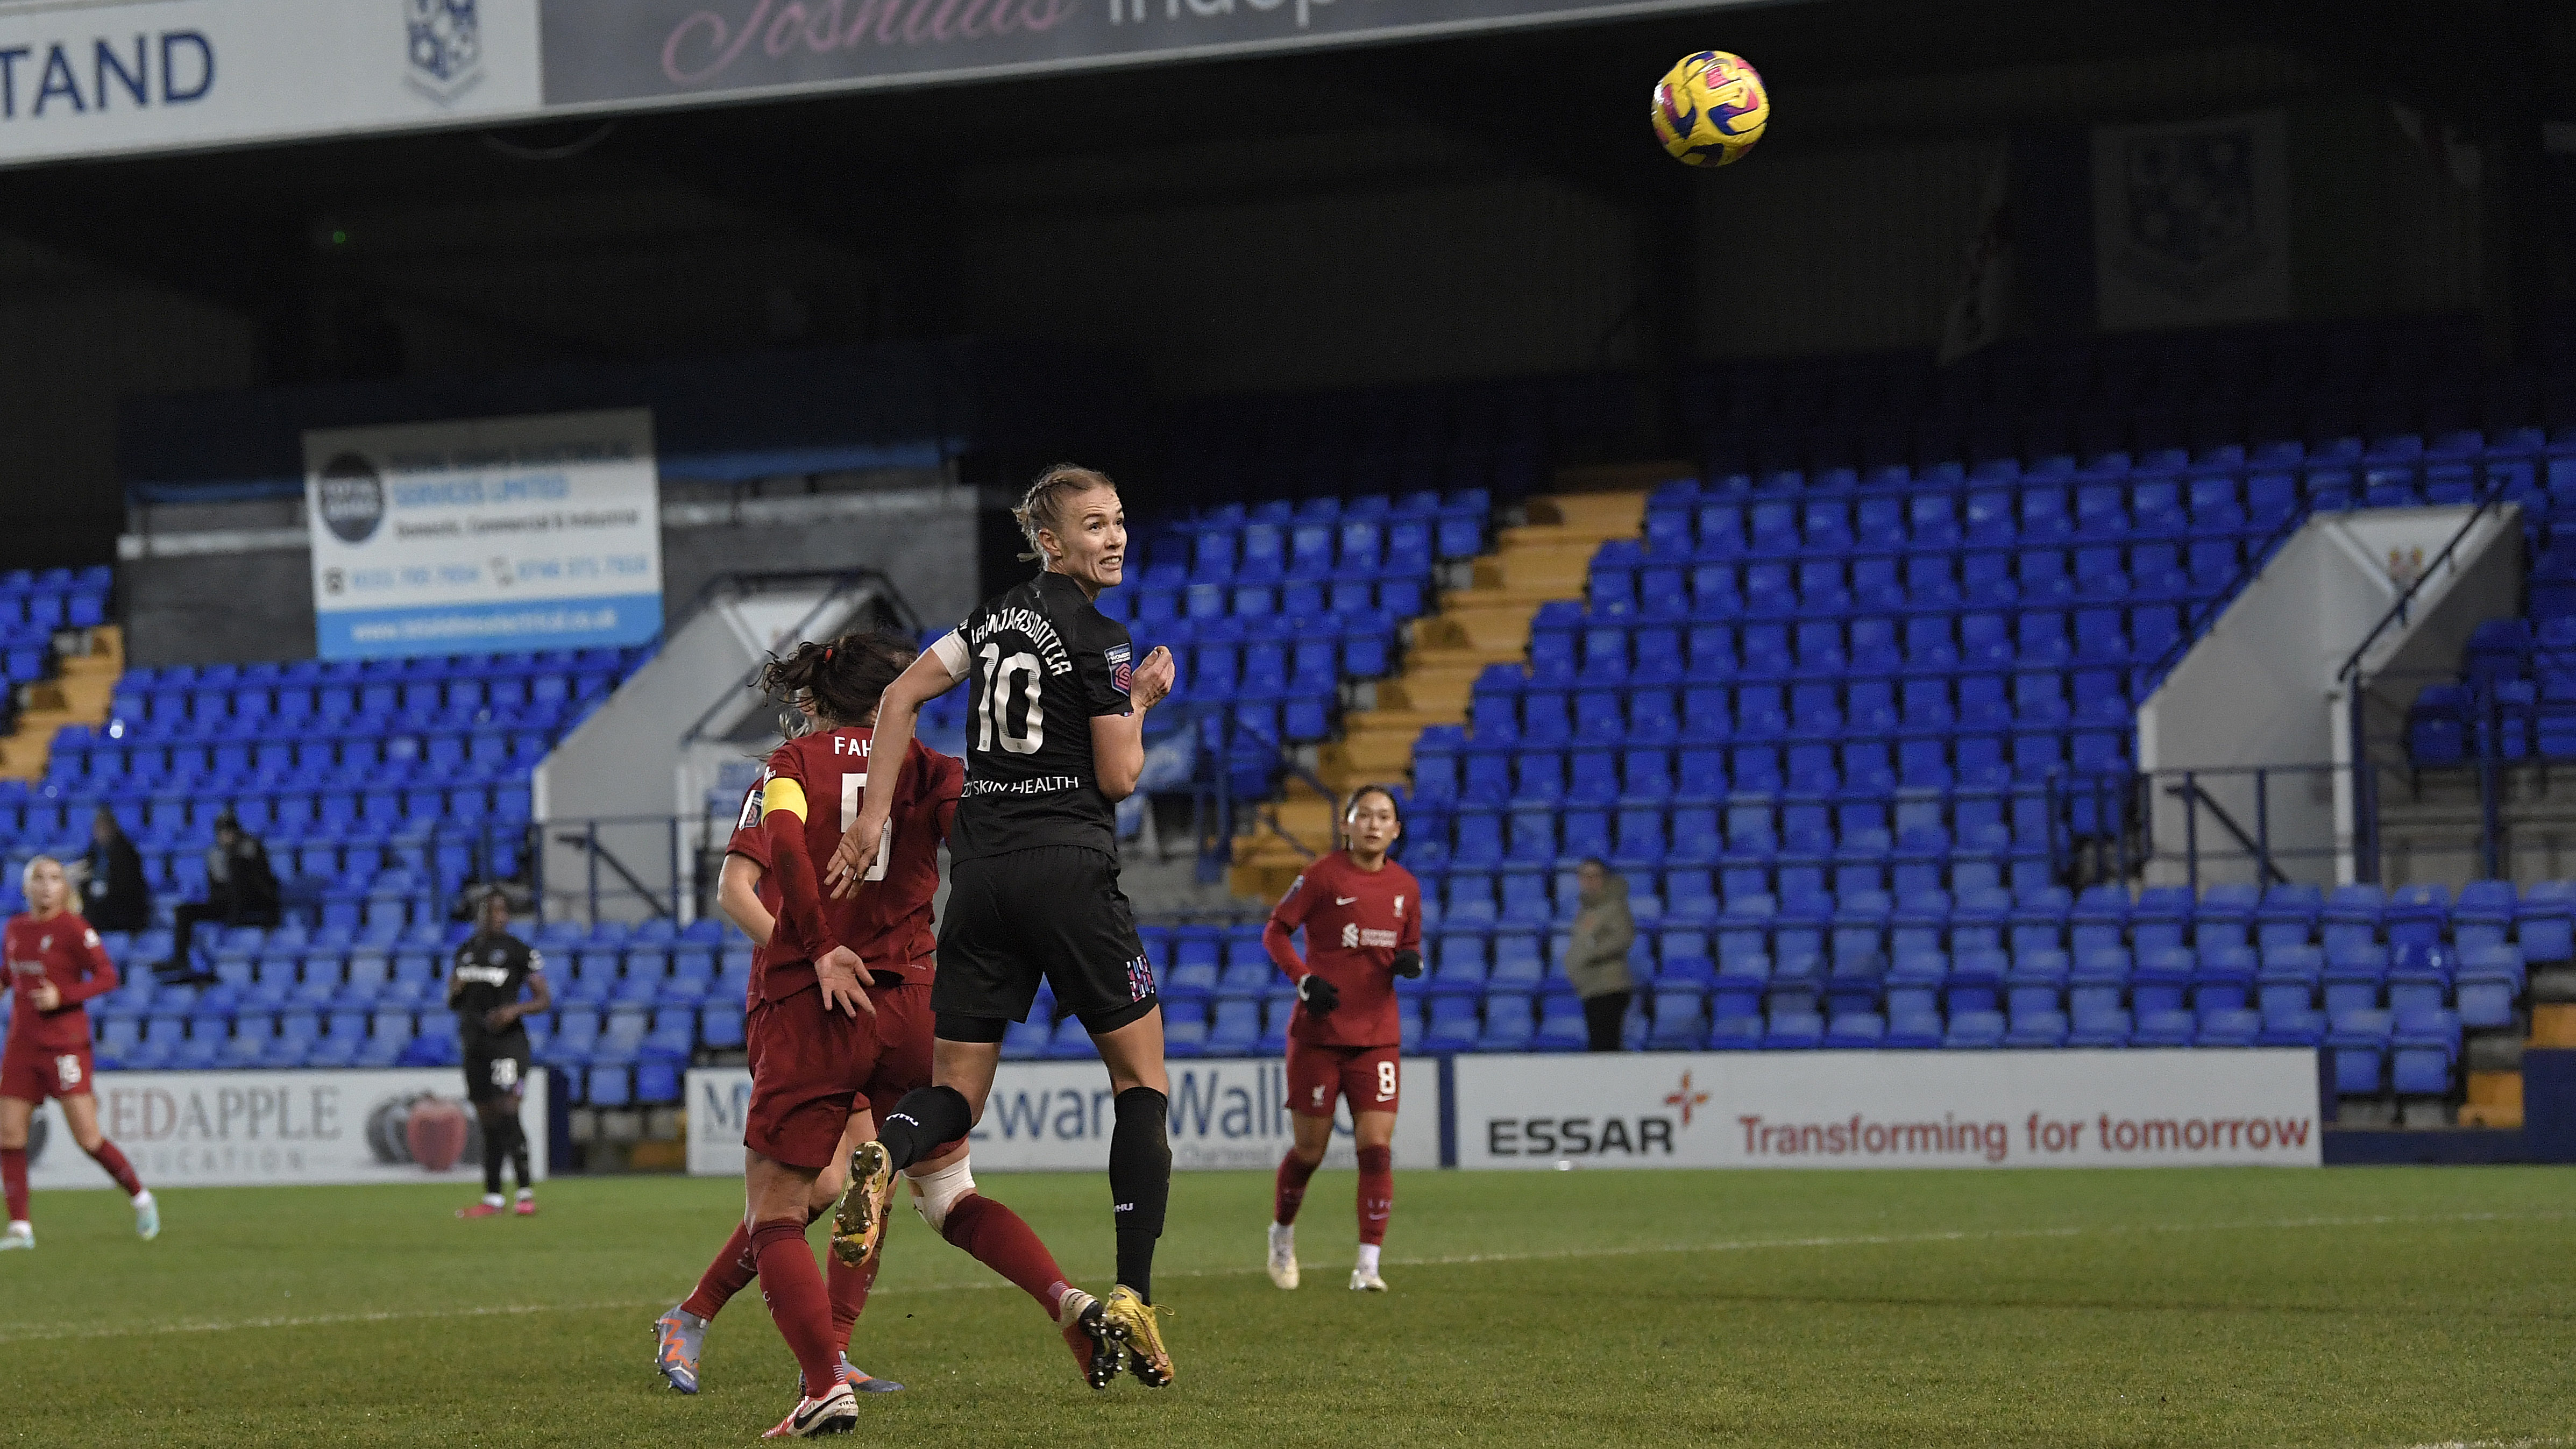 Brynjarsdottir heads Hammers into semi-finals of the Conti Cup